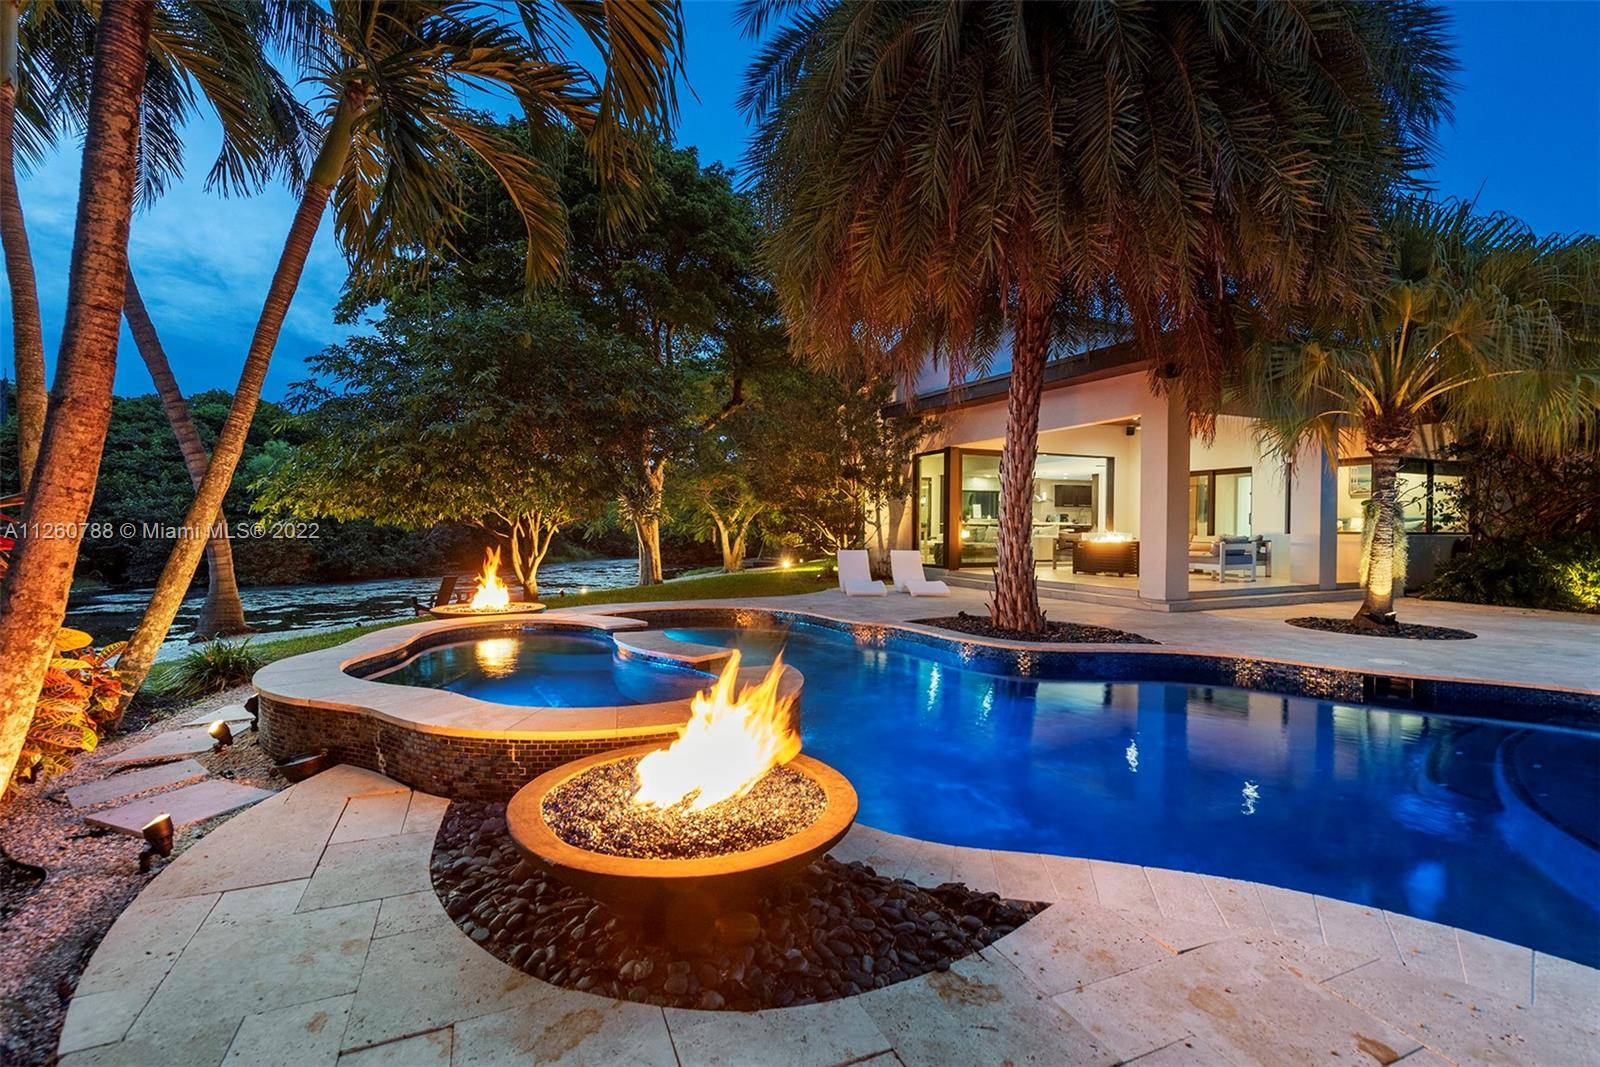 Ft. Lauderdale BeachWelcome to Villa Saha, a fully remodeled urban oasis nestled one block from the pristine shores of the Atlantic Ocean and perched on the intracoastal waters off the ...